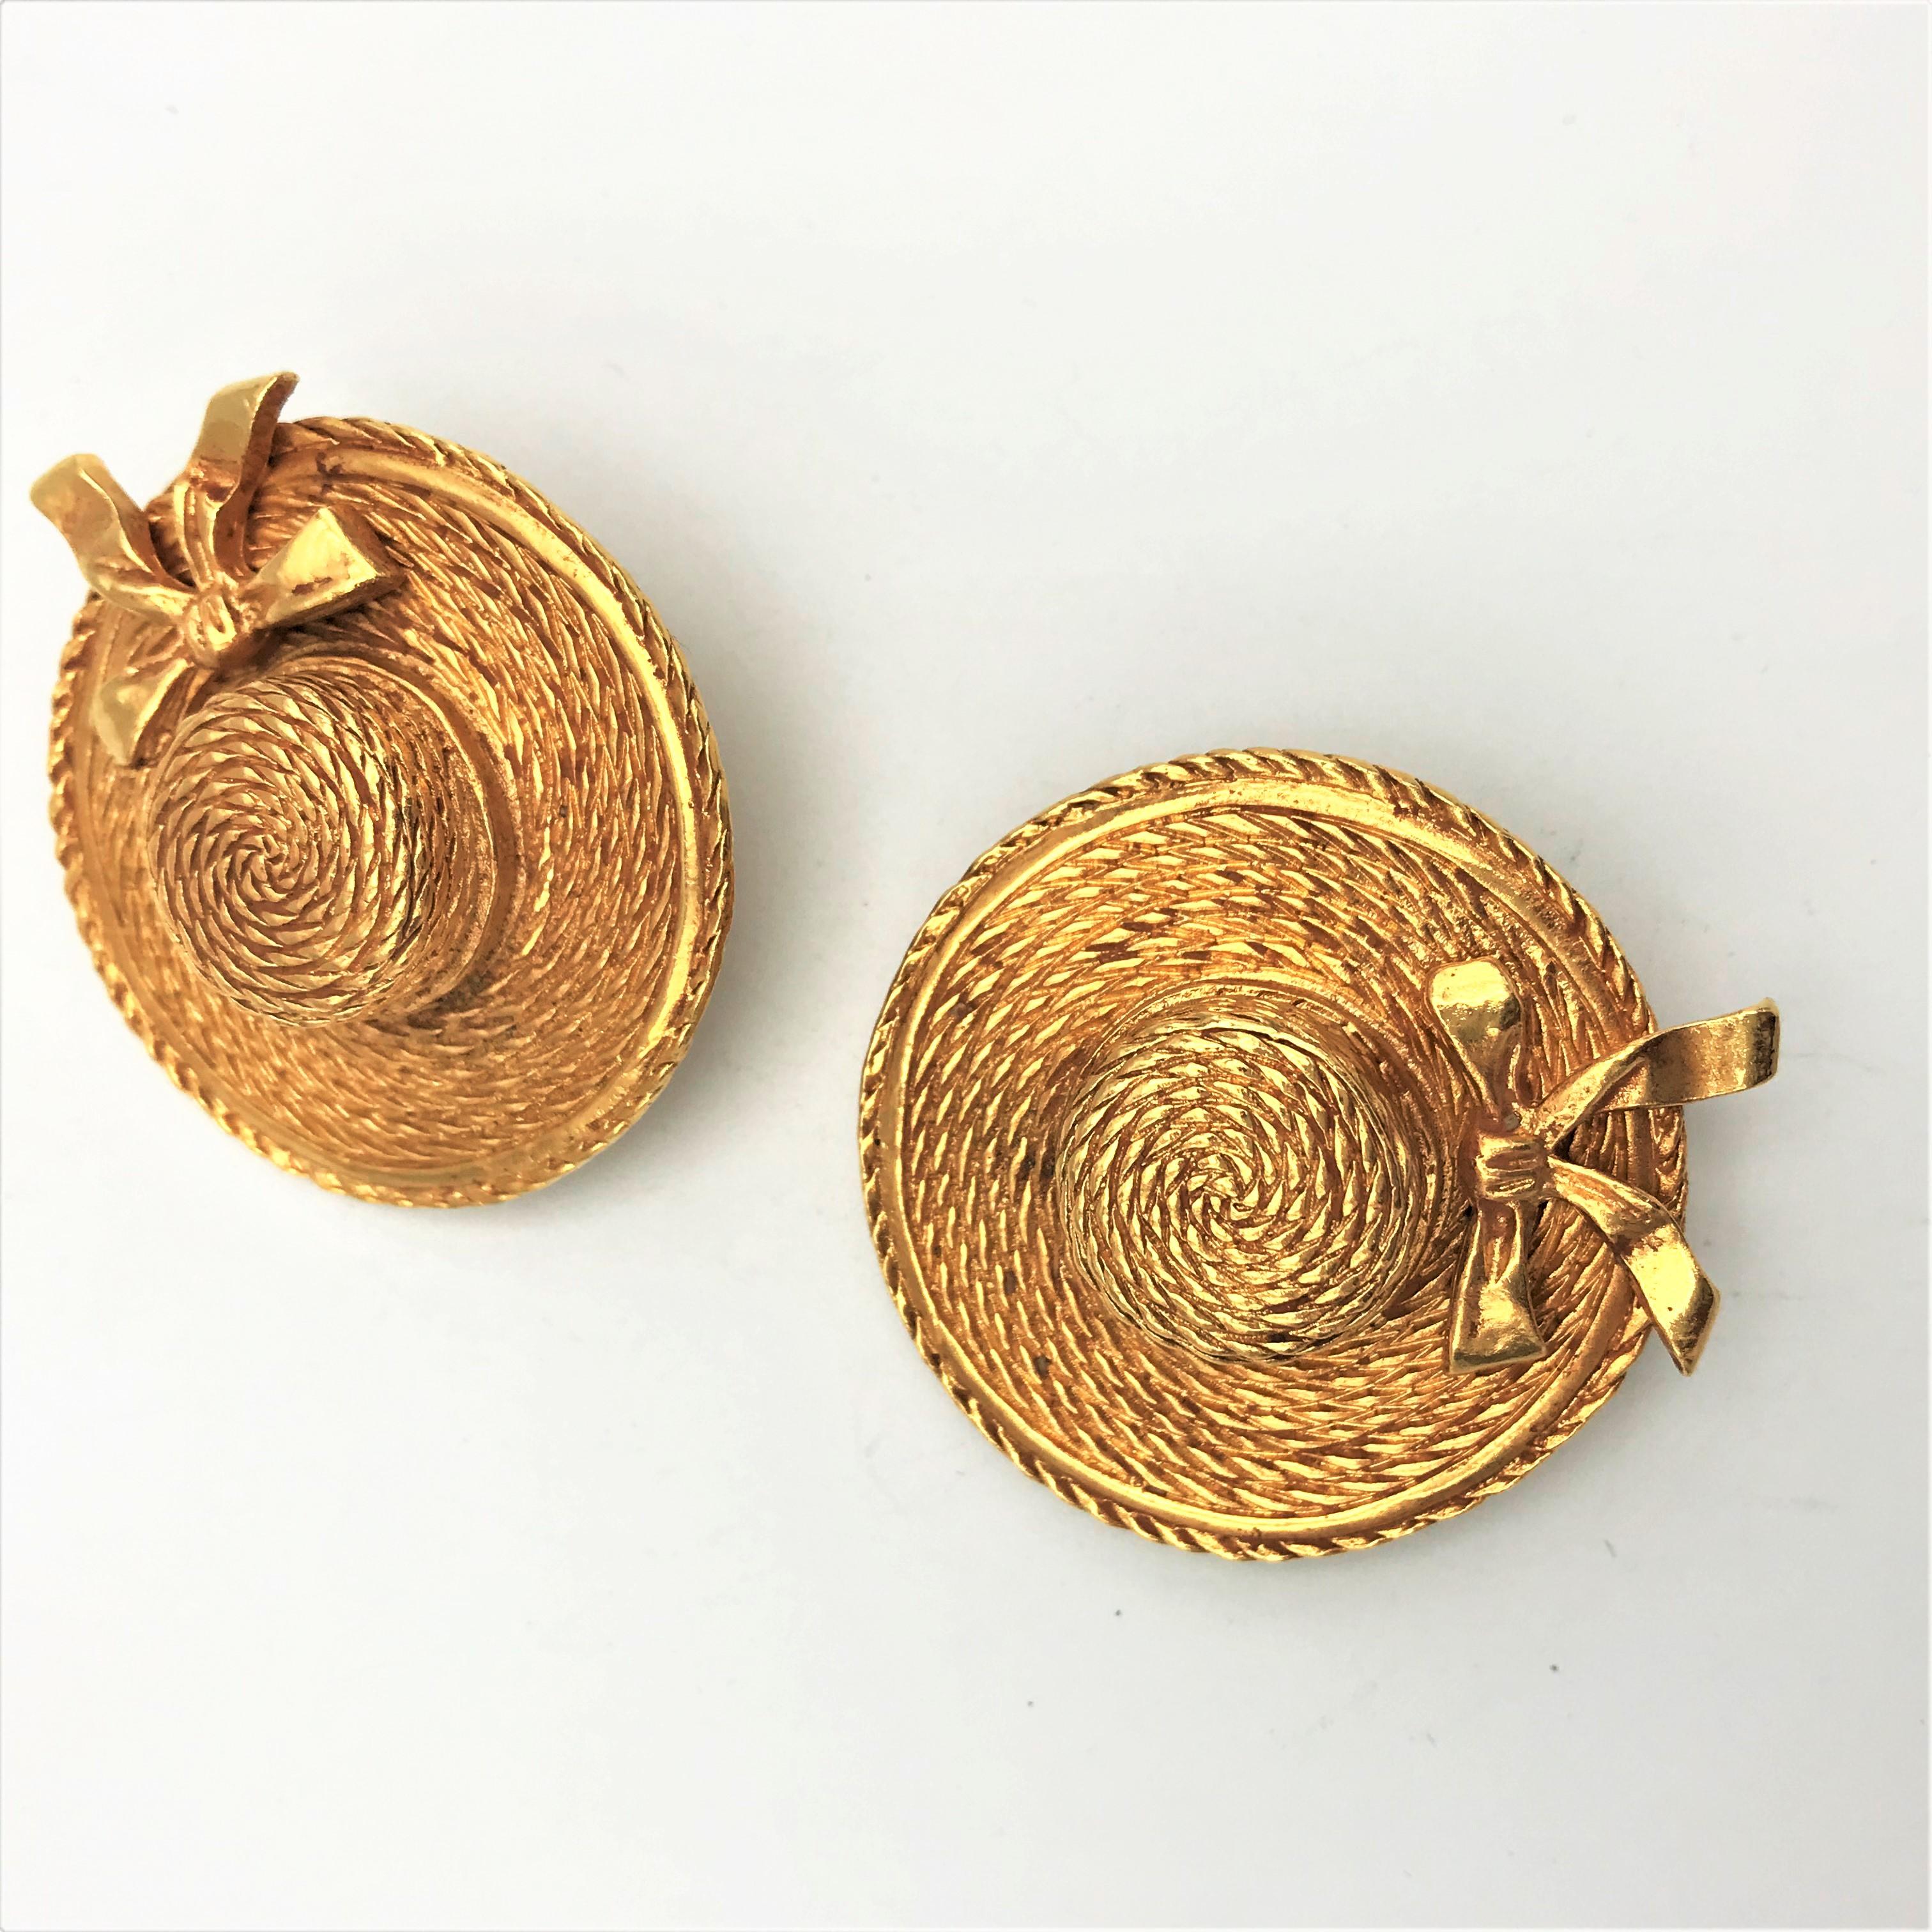 Chanel Clip-on Earrings in the shape of a hat, signed 1970/80s gold plated  For Sale 2